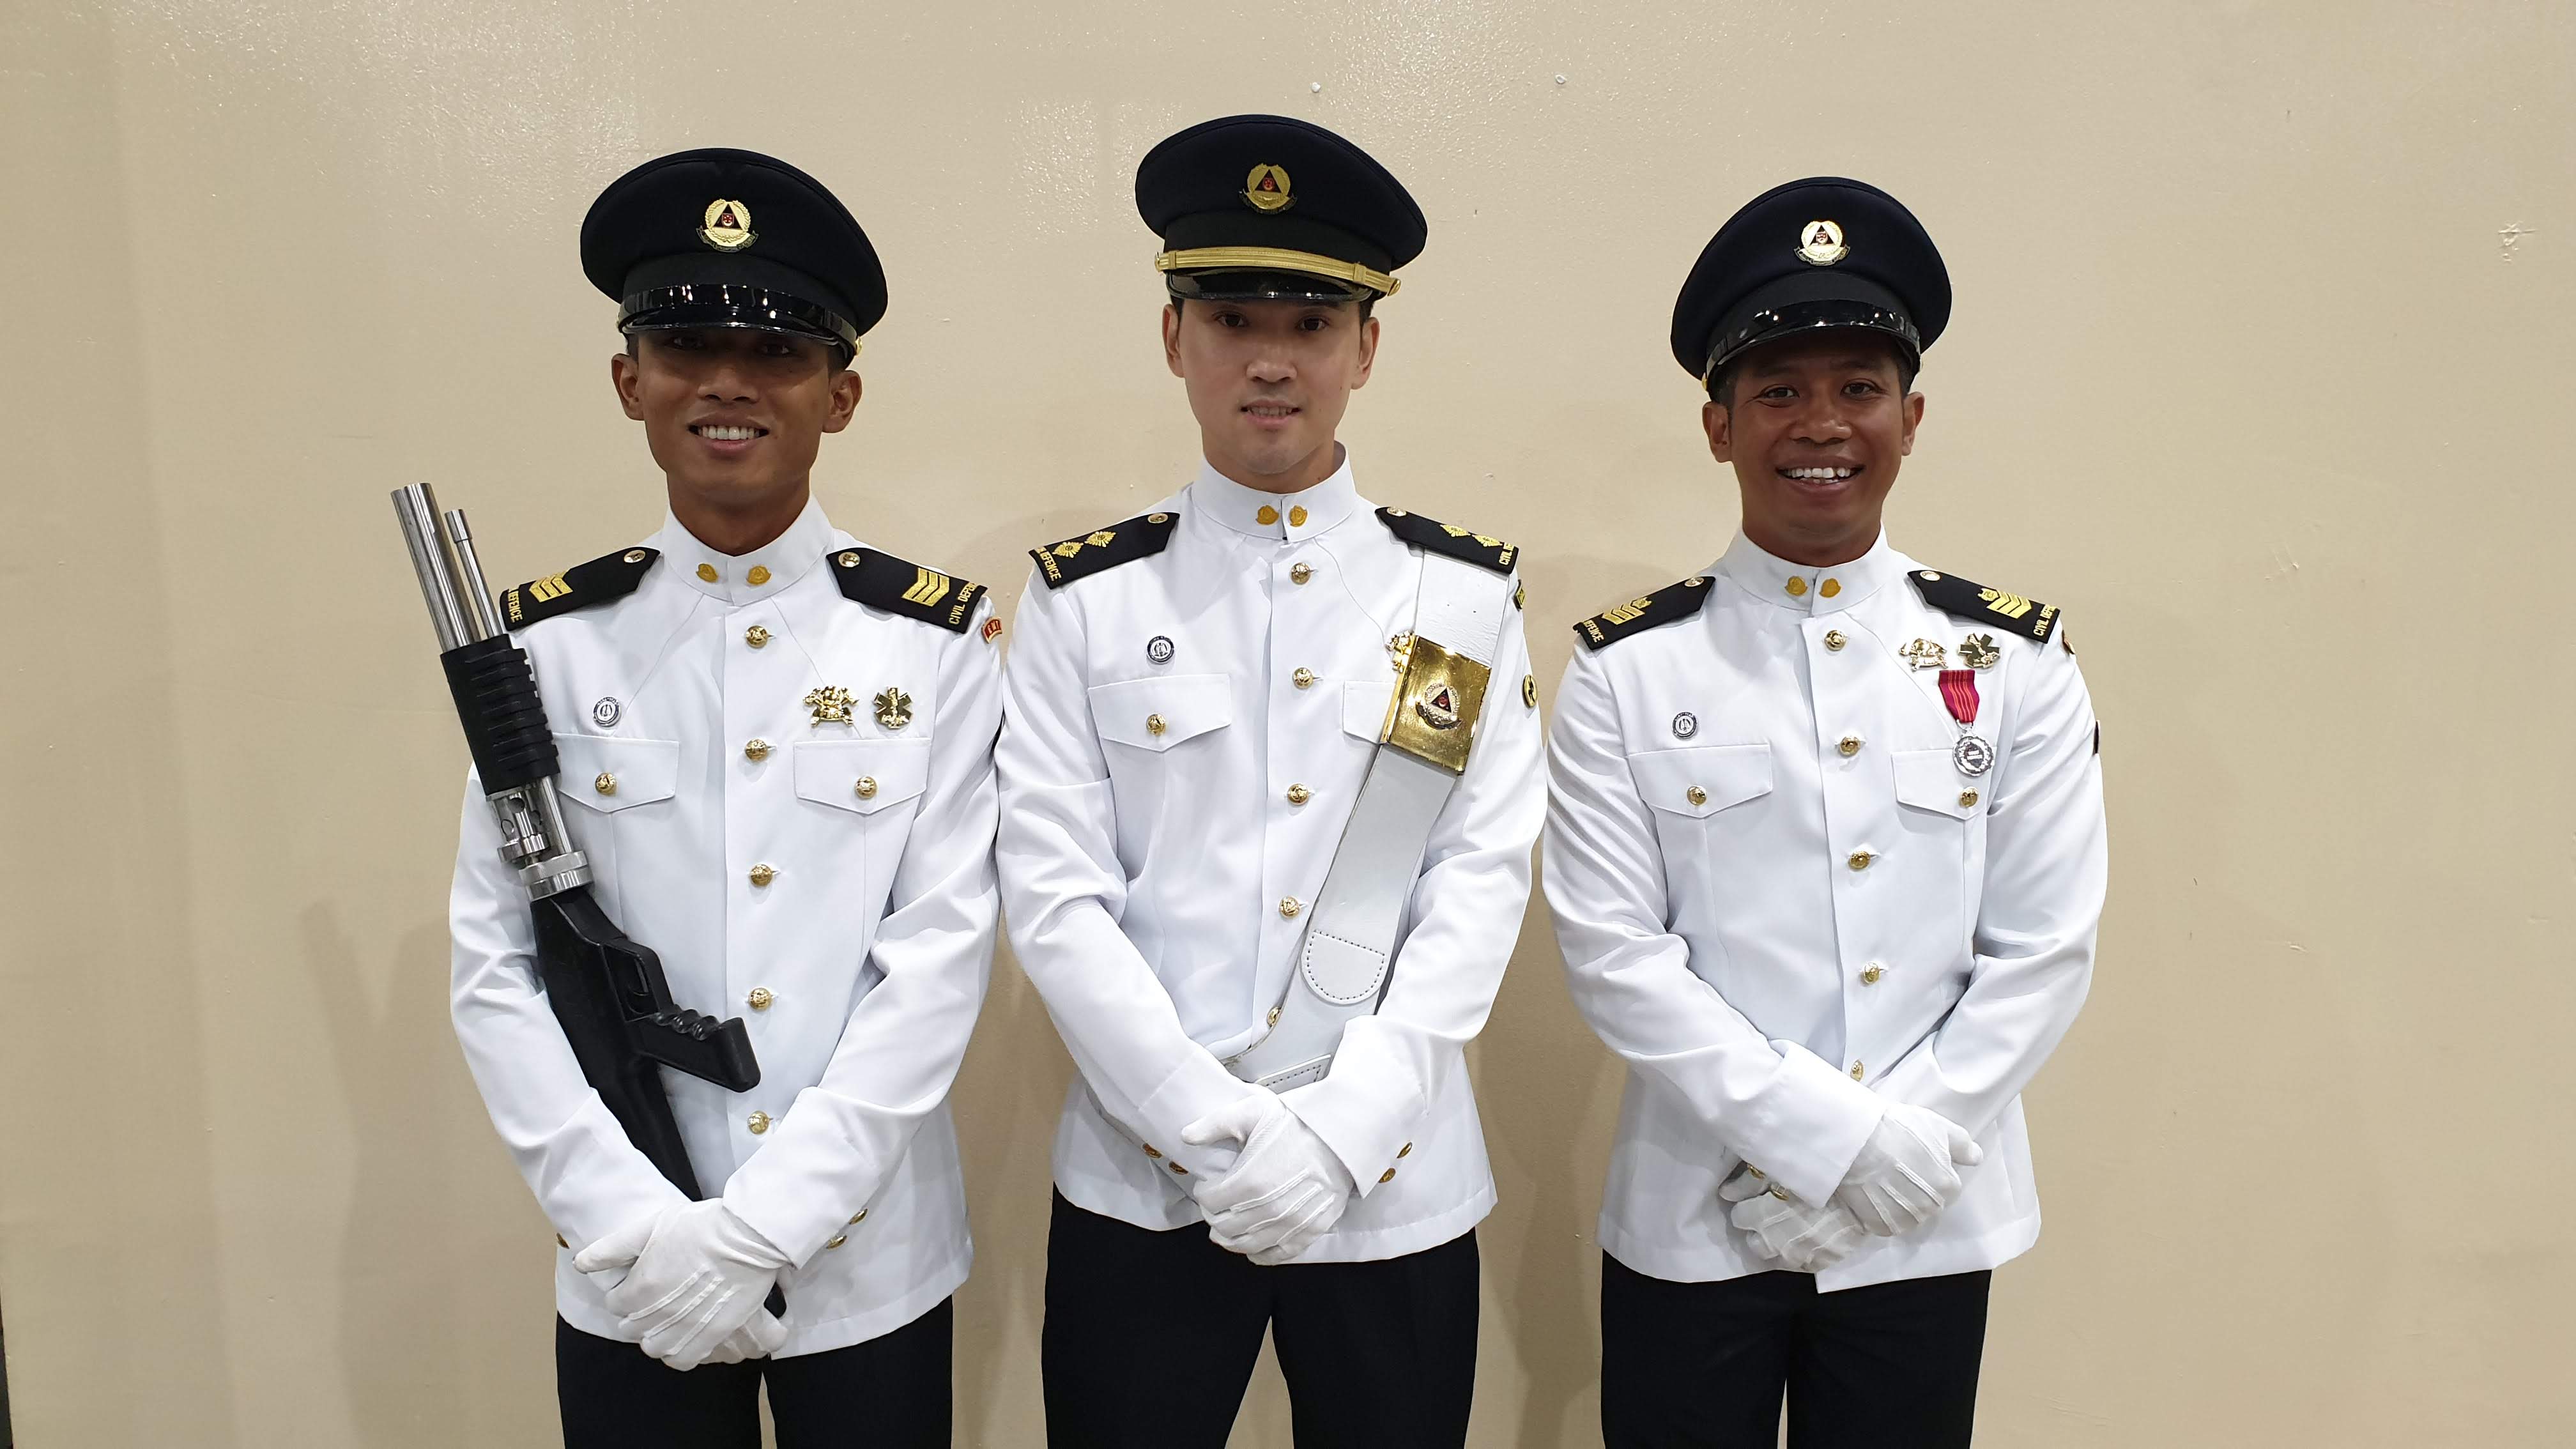 LTA (NS) Gary Tan (in the middle) was a flagbearer representing Central Fire Station at the 2019 SCDF Parade.